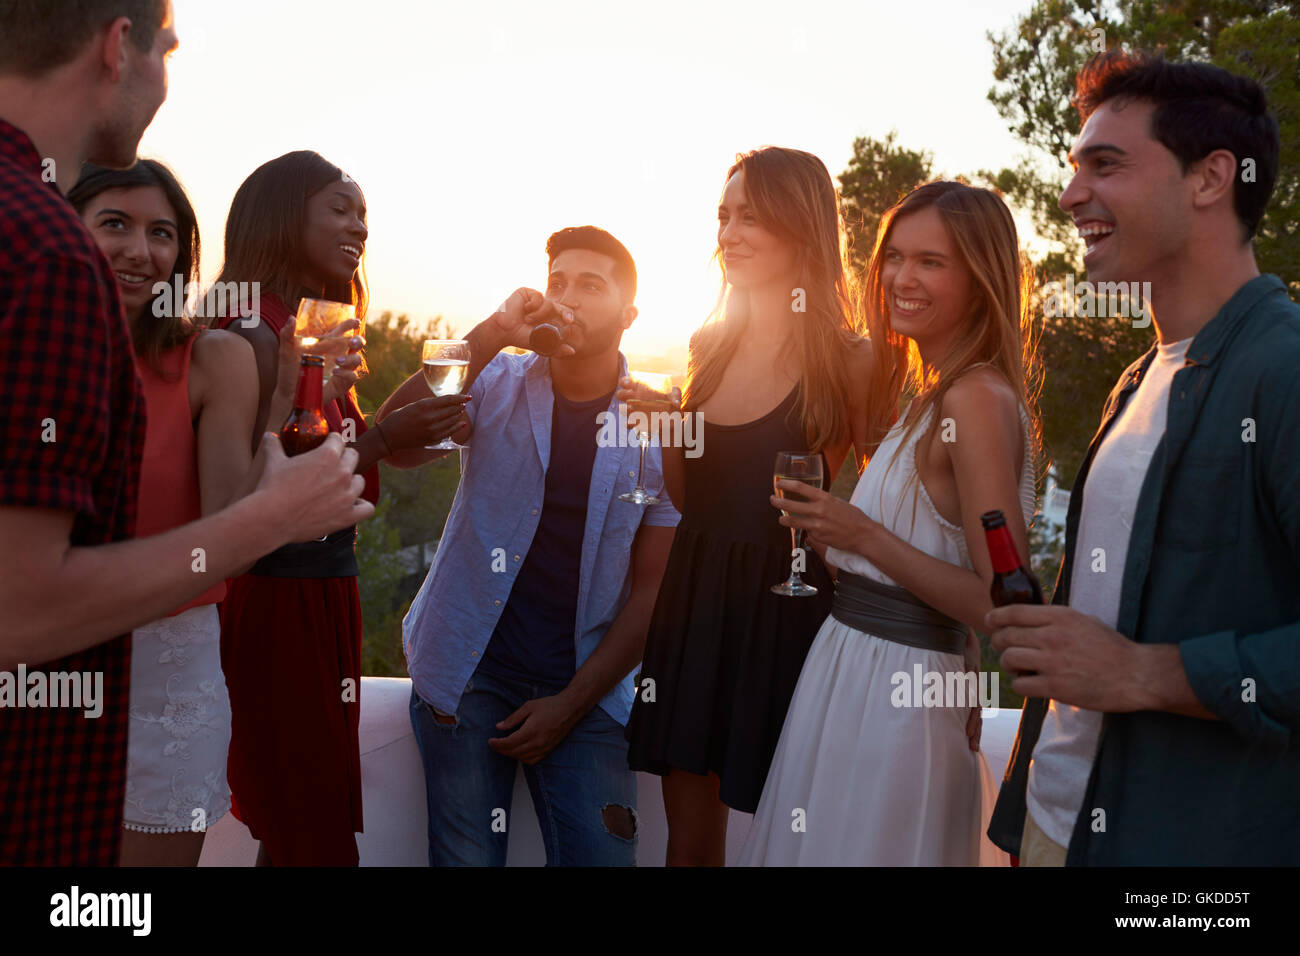 Adult friends socialising at a party on a rooftop at sunset Stock Photo